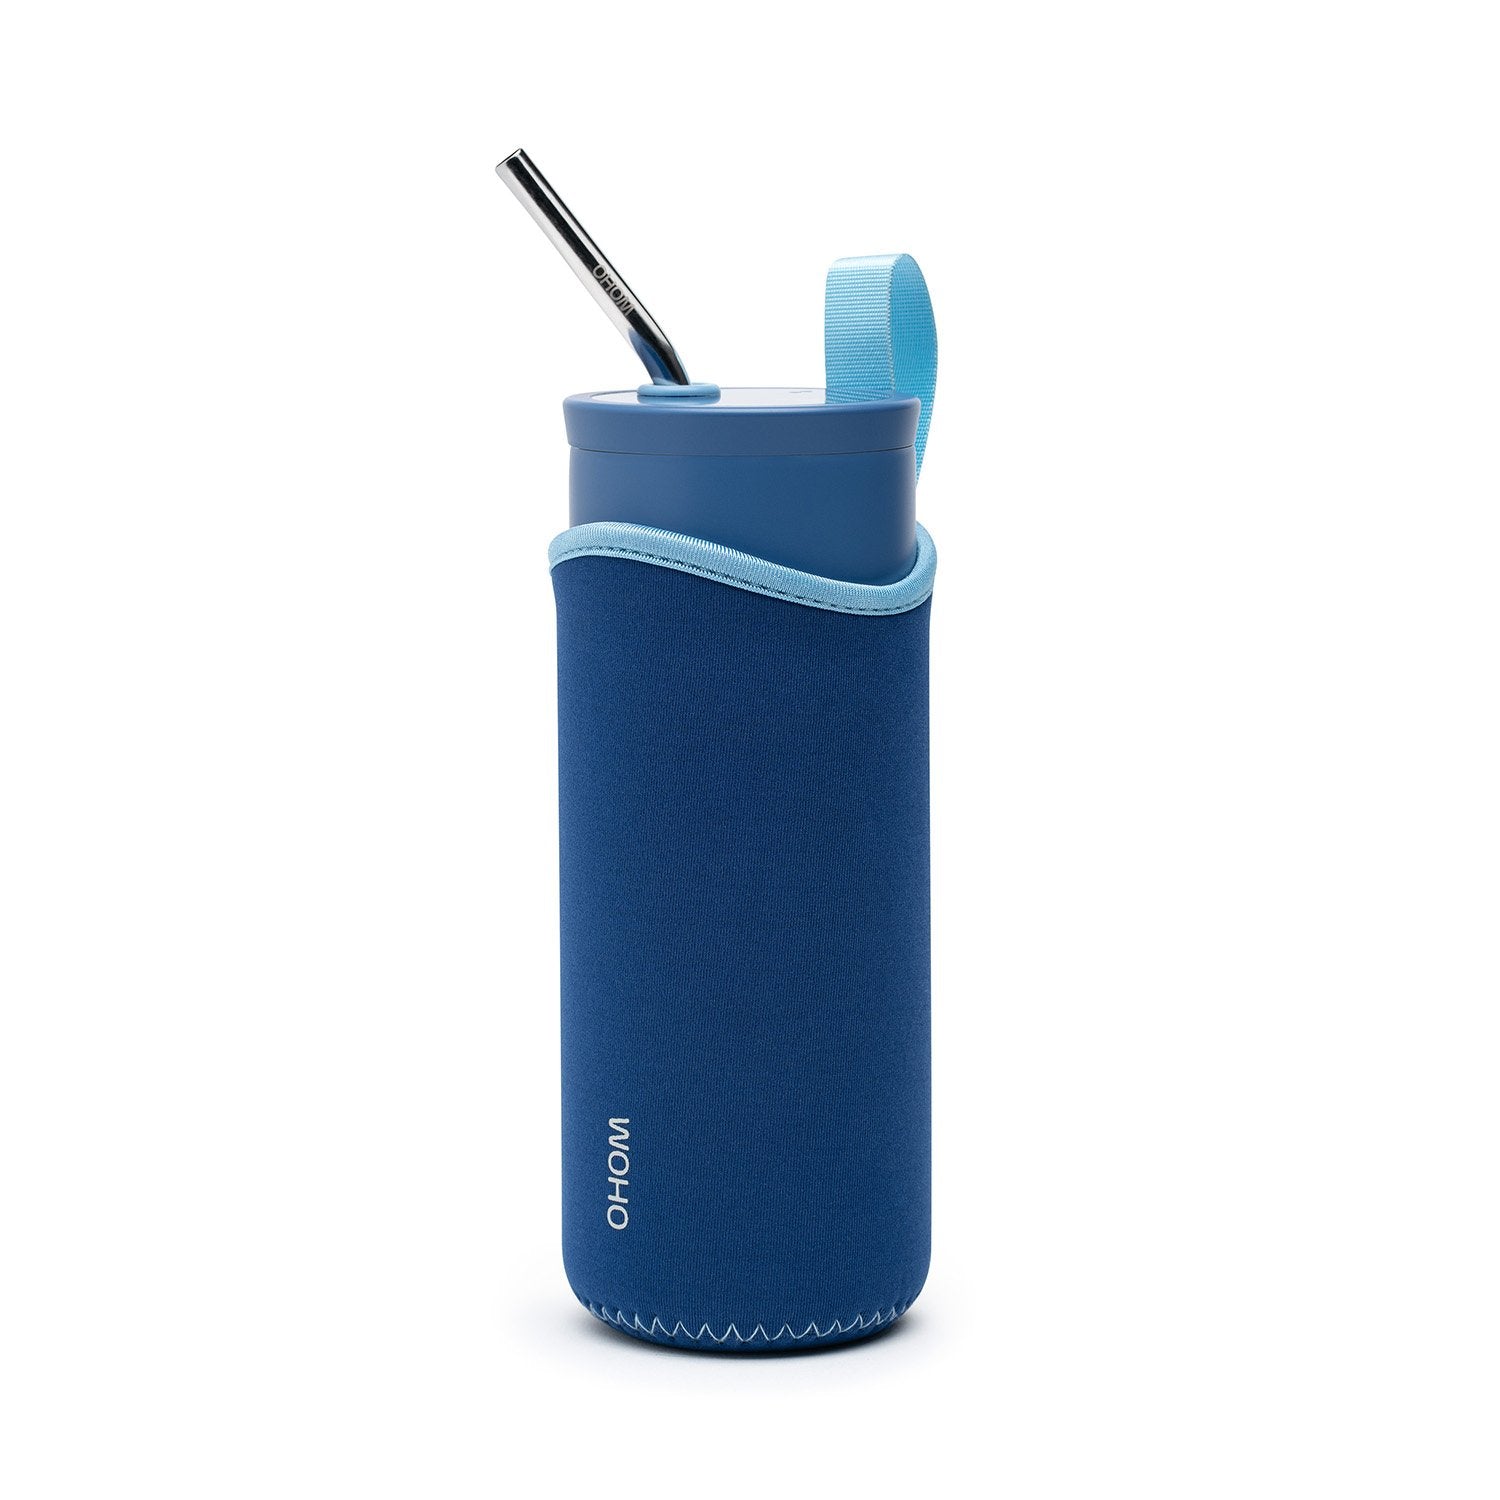 Blue pouch with blue bottle and OHOM logo